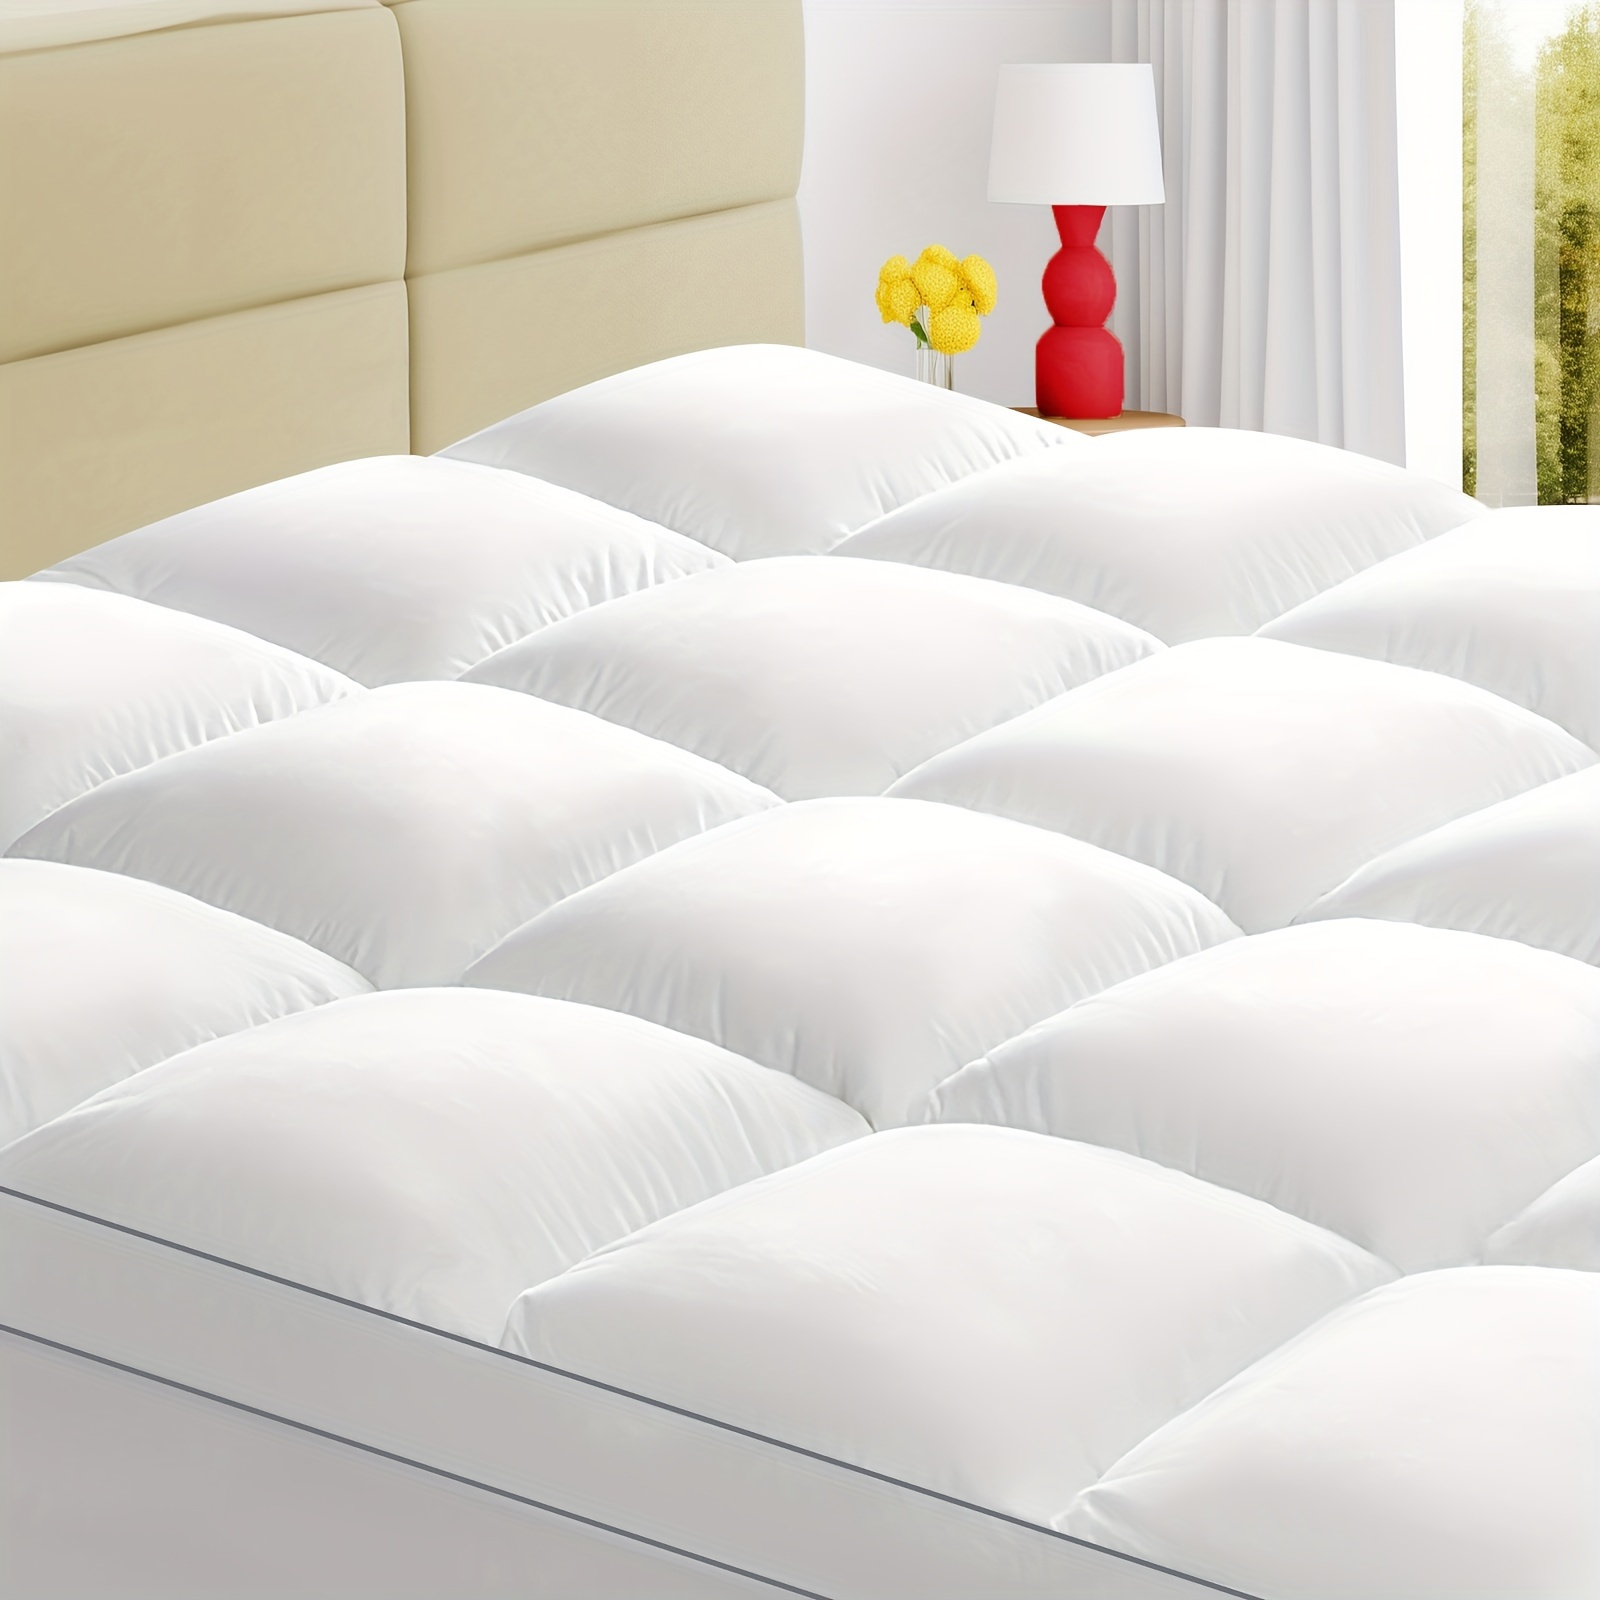 

800 Gsm Extra Thick Mattress Topper Set 4 Piece Queen Size - Soft Bed Sheets Set - Extra Thick Mattress Pad Cover For Back Pain - Overfilled Plush Pillow Top With 8-21 Inch Deep Pocket, White